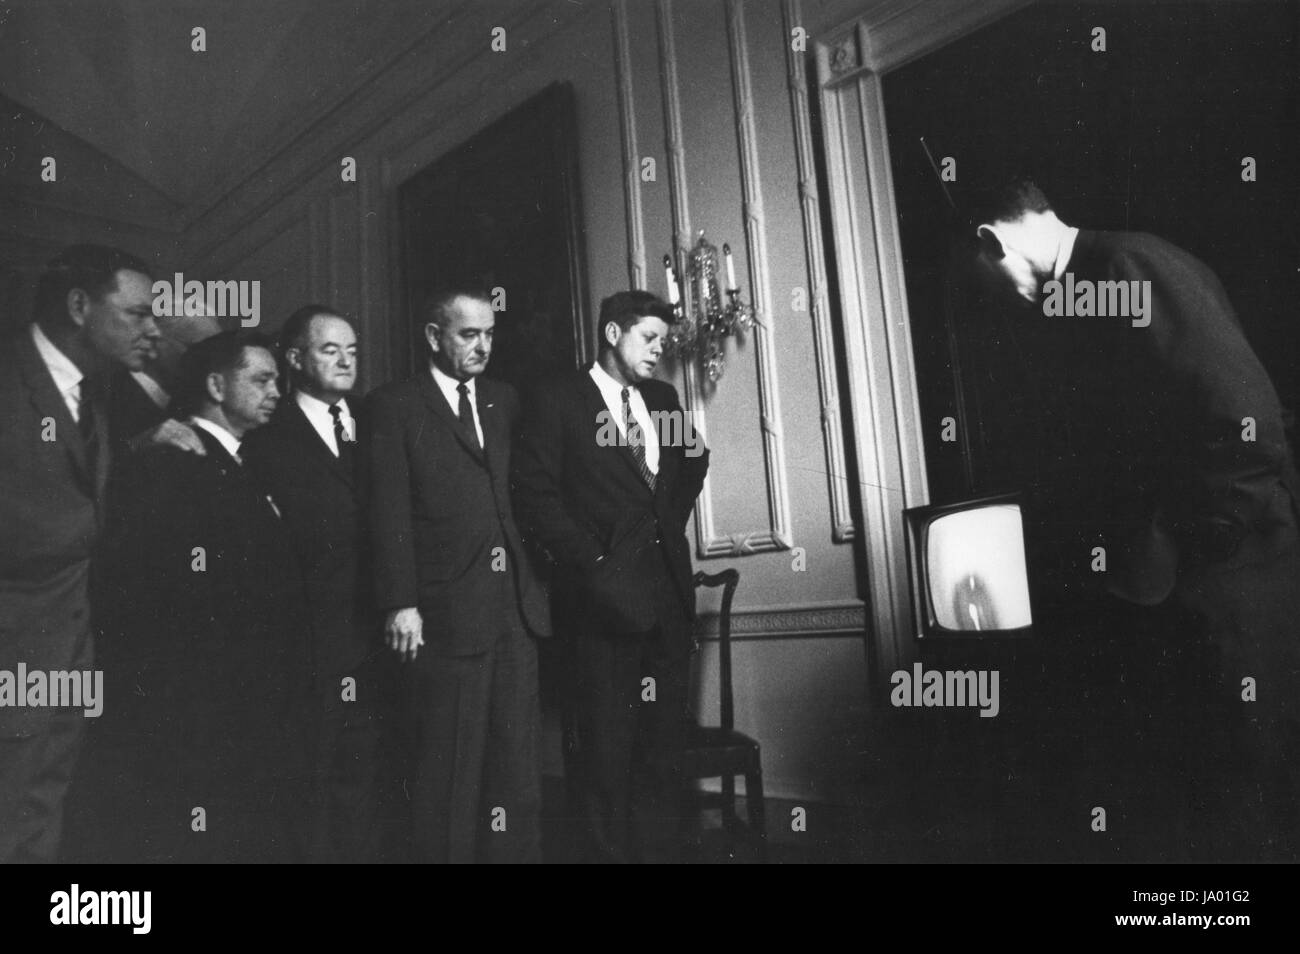 President John F. Kennedy watches the launch of the Mercury spacecraft carrying John H. Glenn, Jr. on television with, from left to right, Rep. Hale Boggs; Speaker of the House John McCormack; Rep. Carl Albert; Sen. Hubert Humphrey and Vice-President Lyndon B. Johnson. At extreme right is Sen. Mike Mansfield, Washington, DC, 02/20/1962. Stock Photo